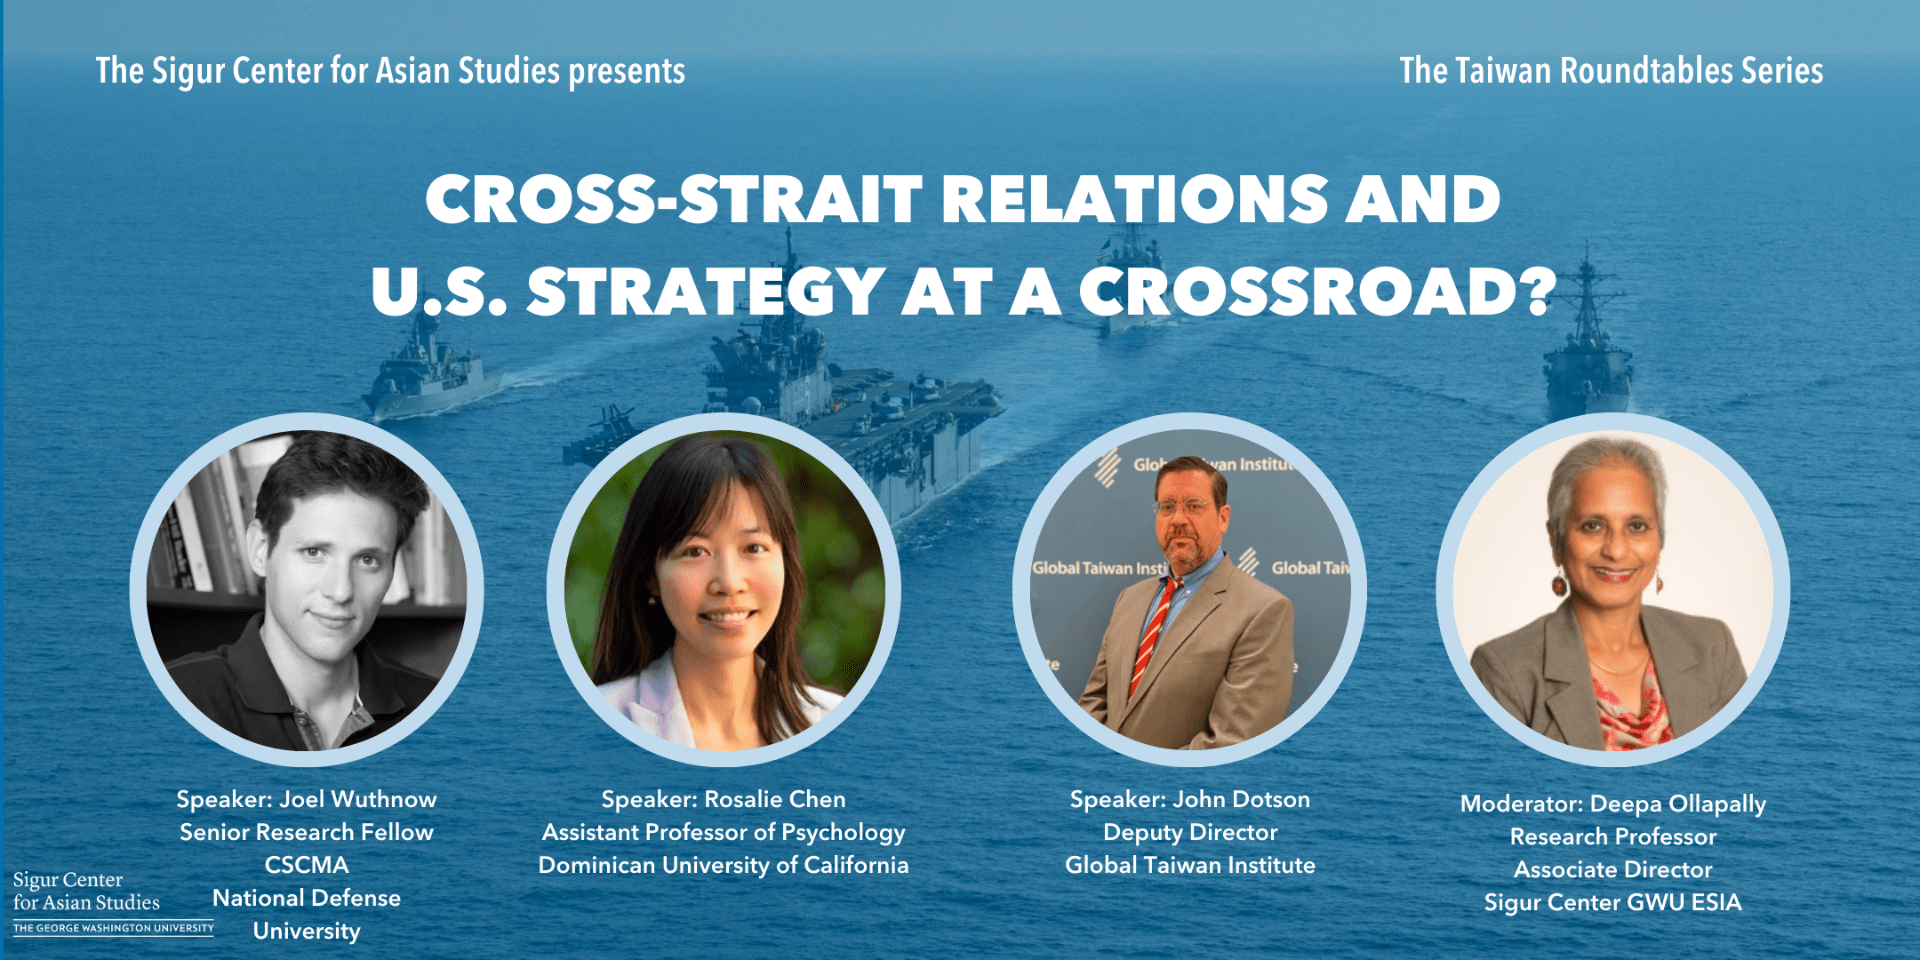 A graphic for Cross-Strait Relations and U.S. Strategy at a Crossroad